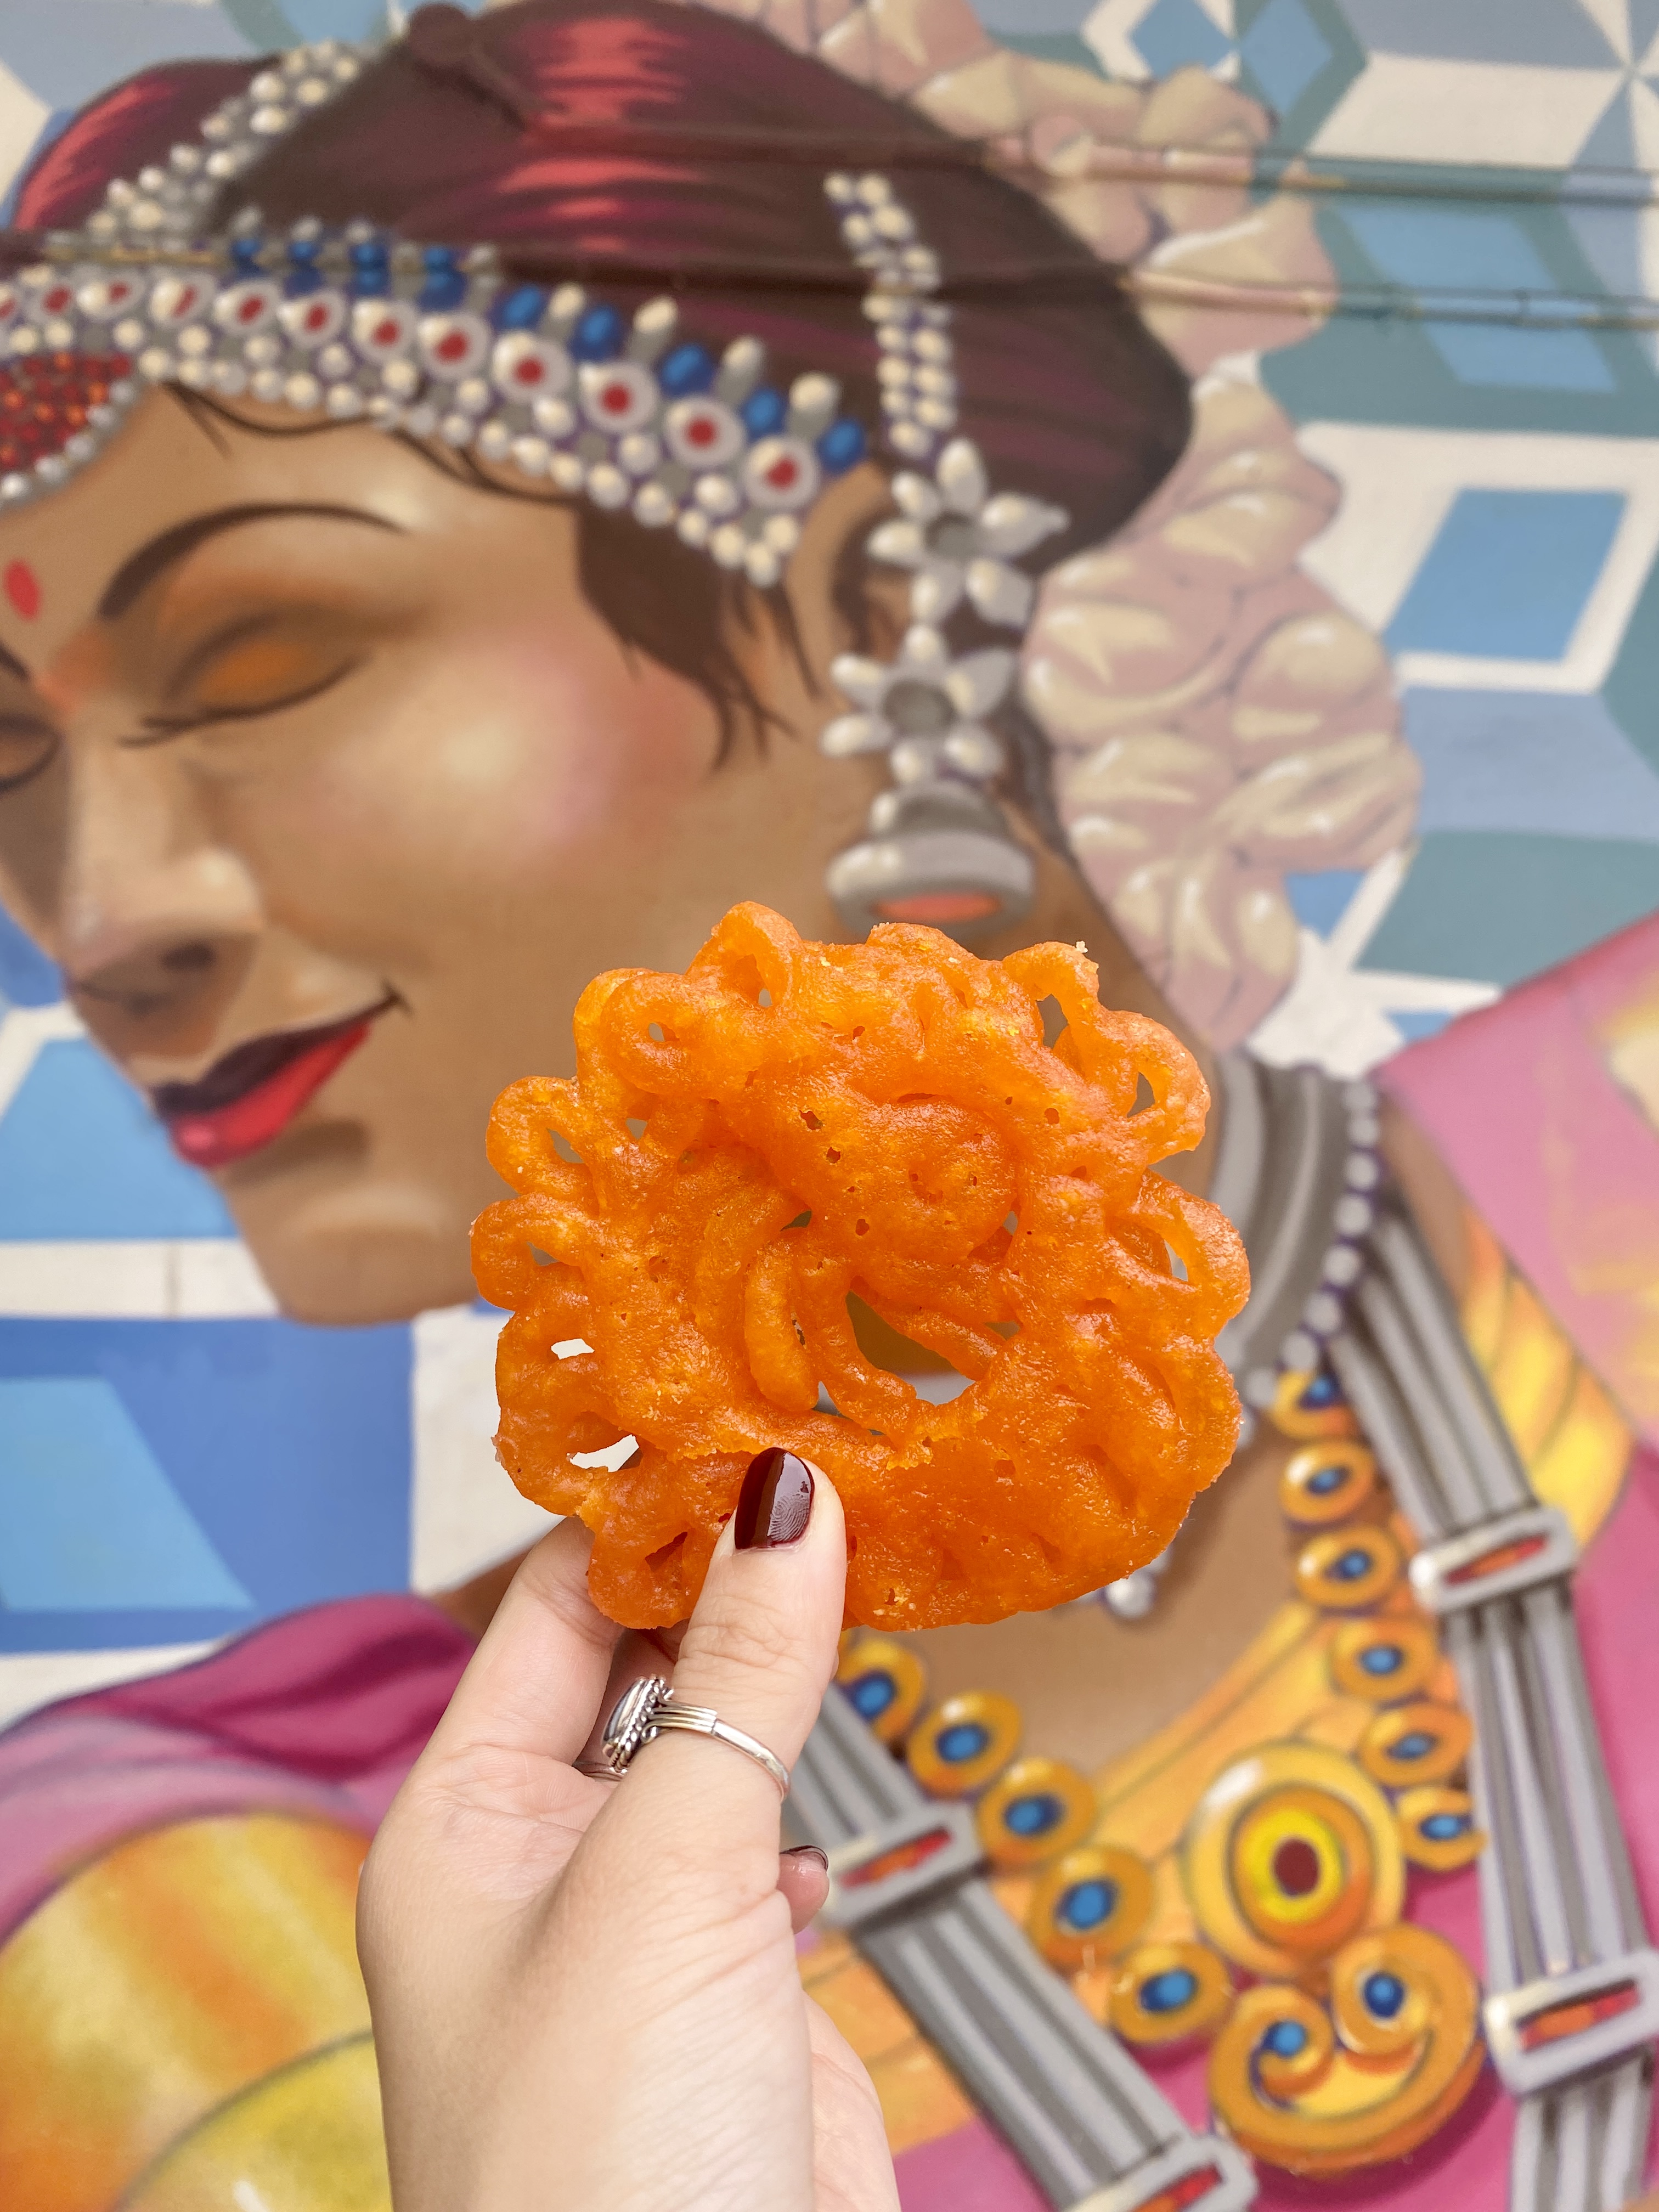 image of an orange indian snack - jalebi against a brightly colored wall